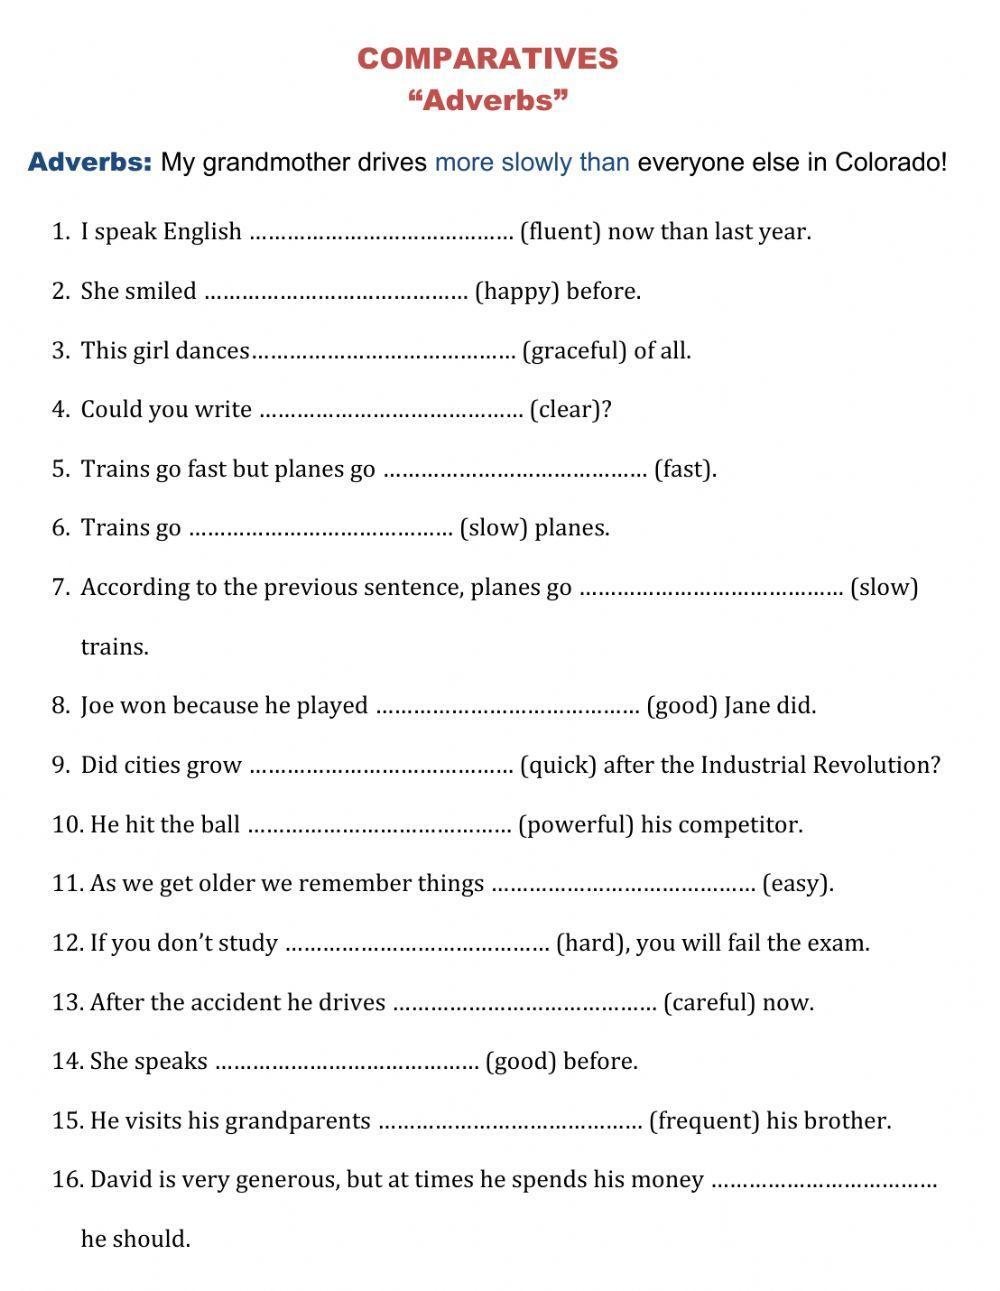 Comparatives with Adverbs and Adjectives